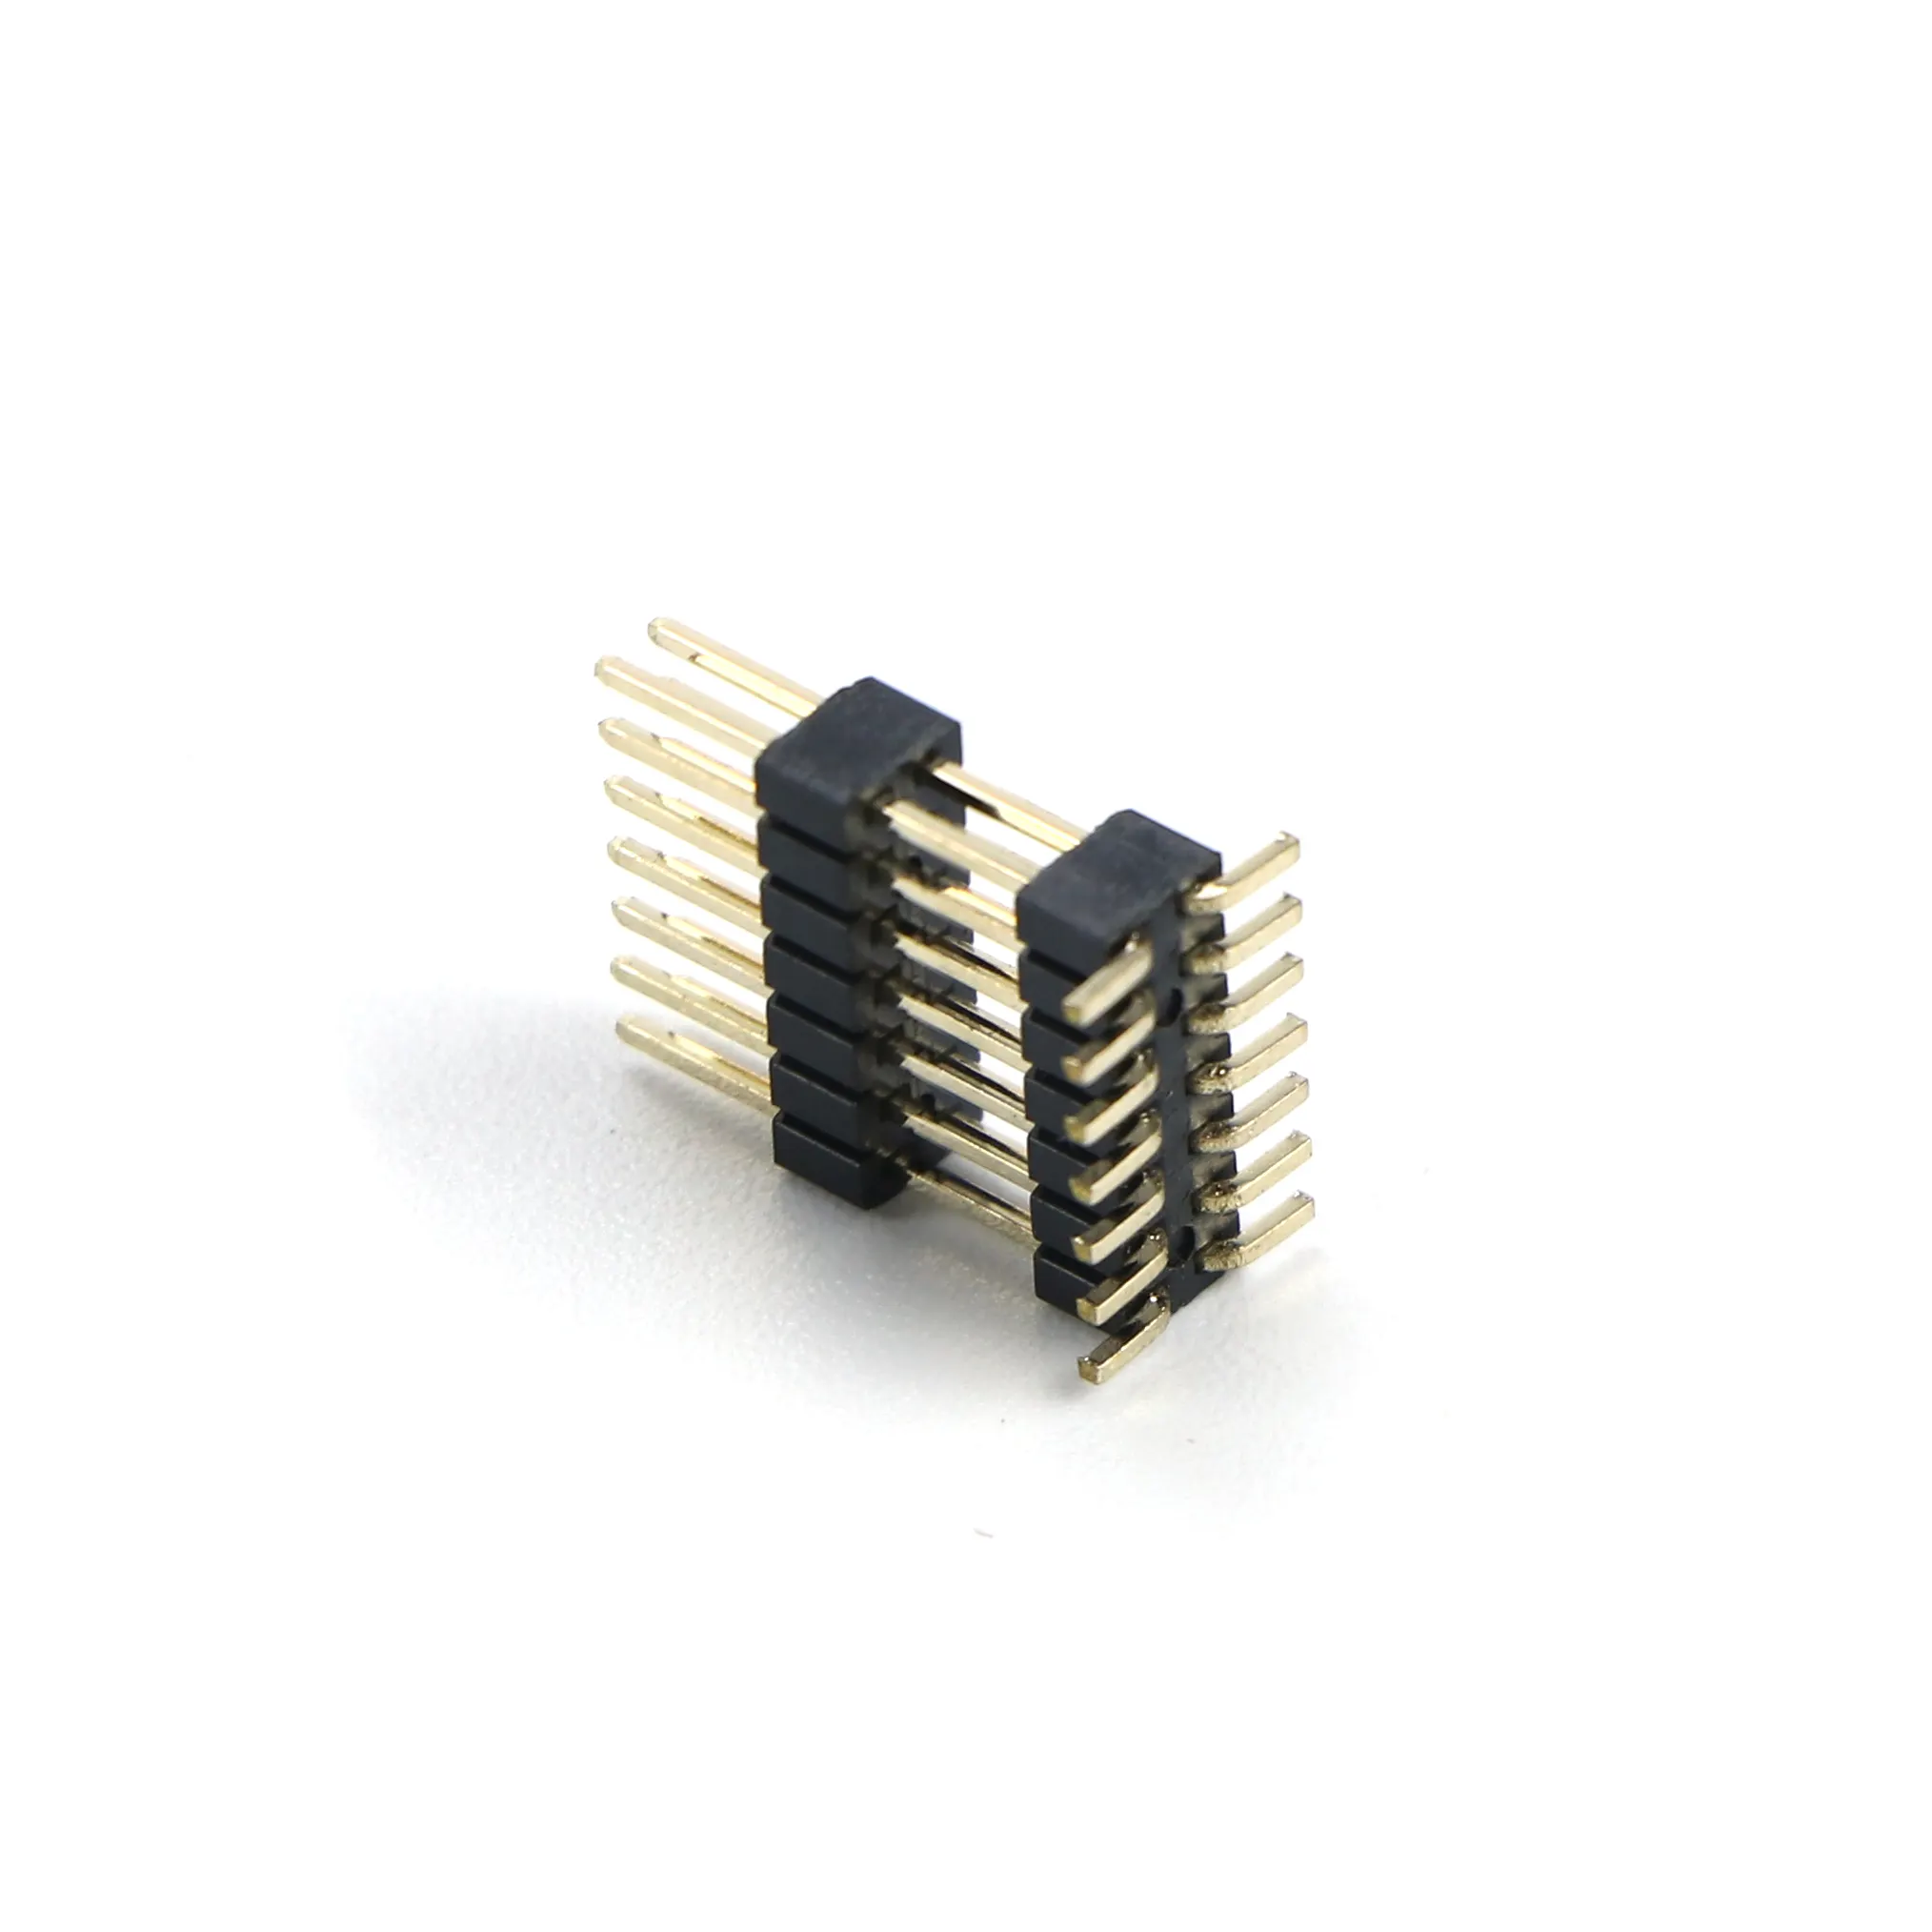 1.27mm 14 Pin Header Gold Plated dual Row dual insulator DIP header for PCB